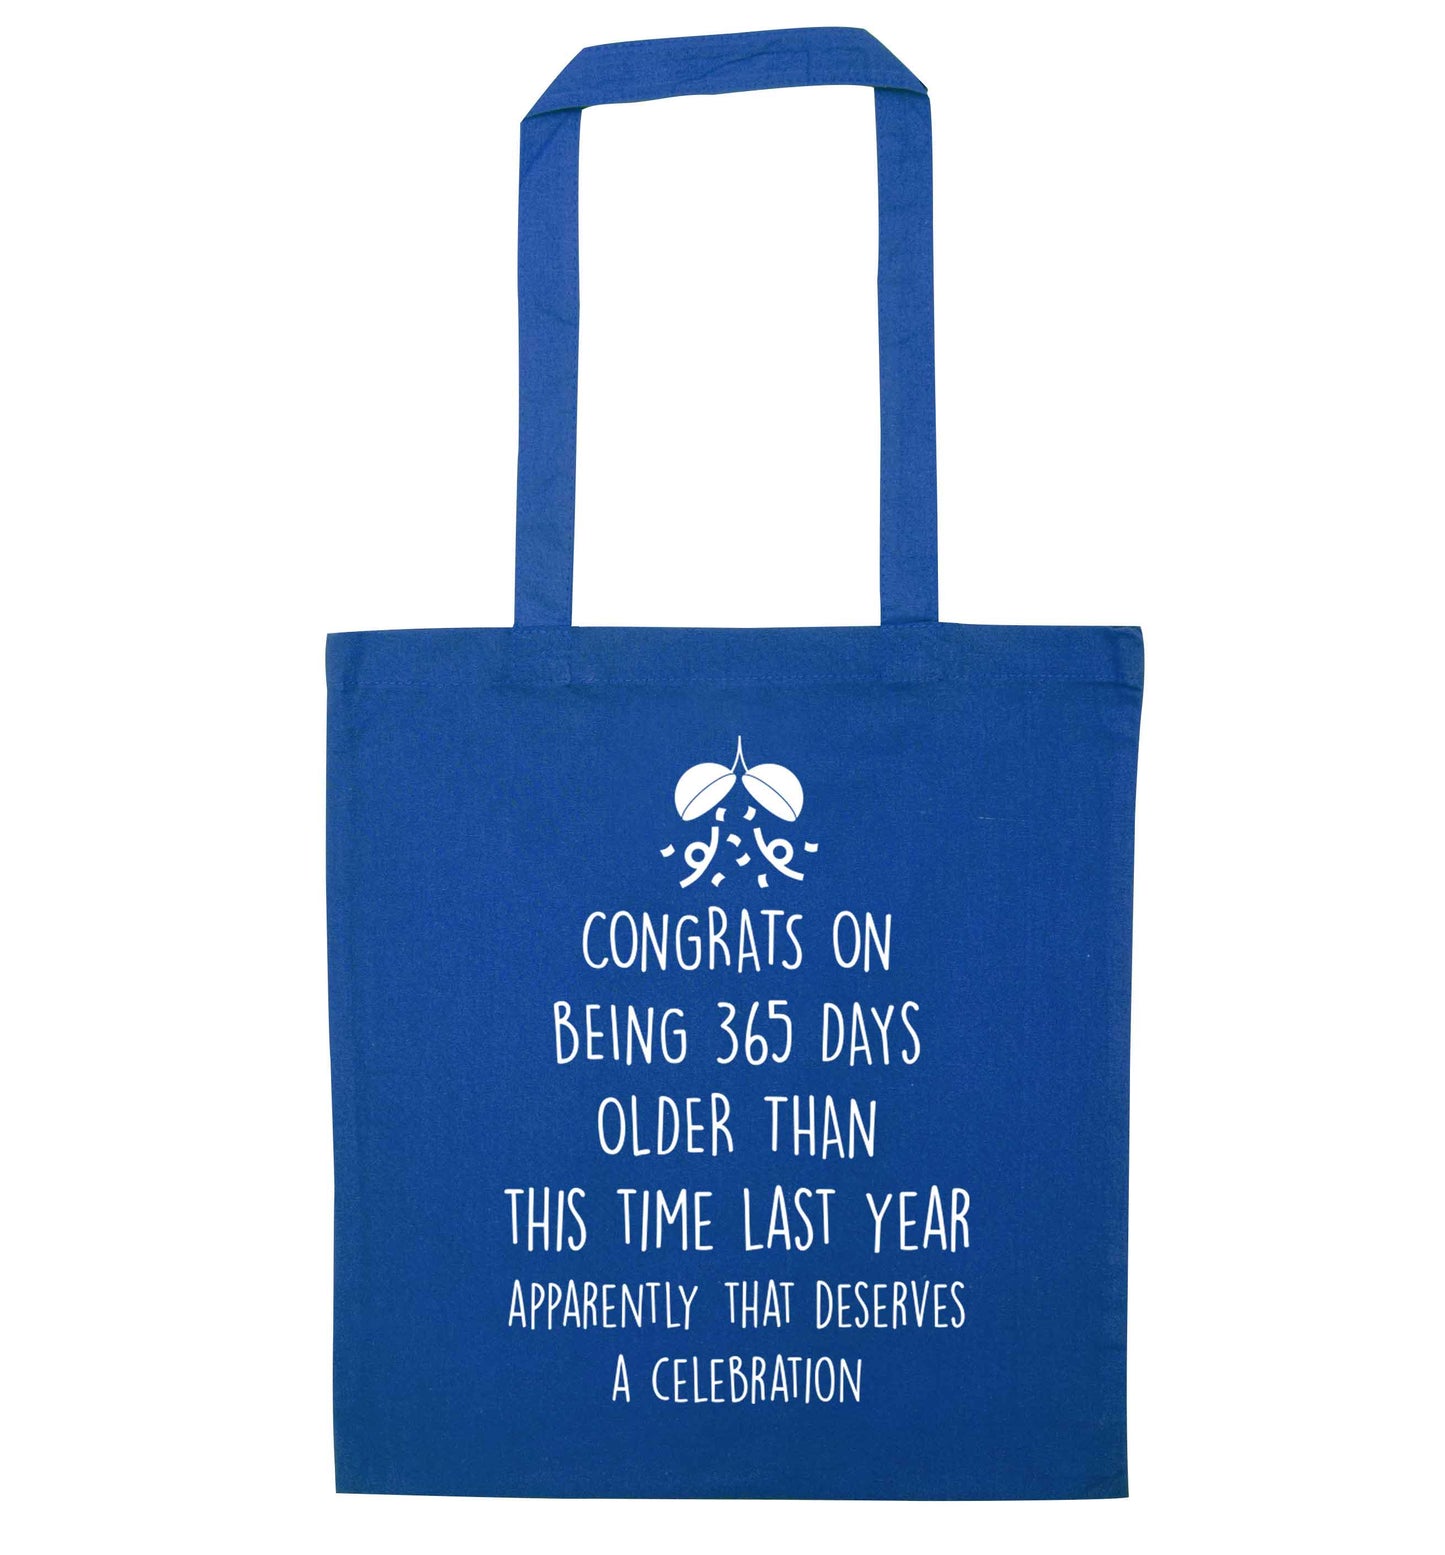 Congrats on being 365 days older than you were this time last year apparently that deserves a celebration blue tote bag